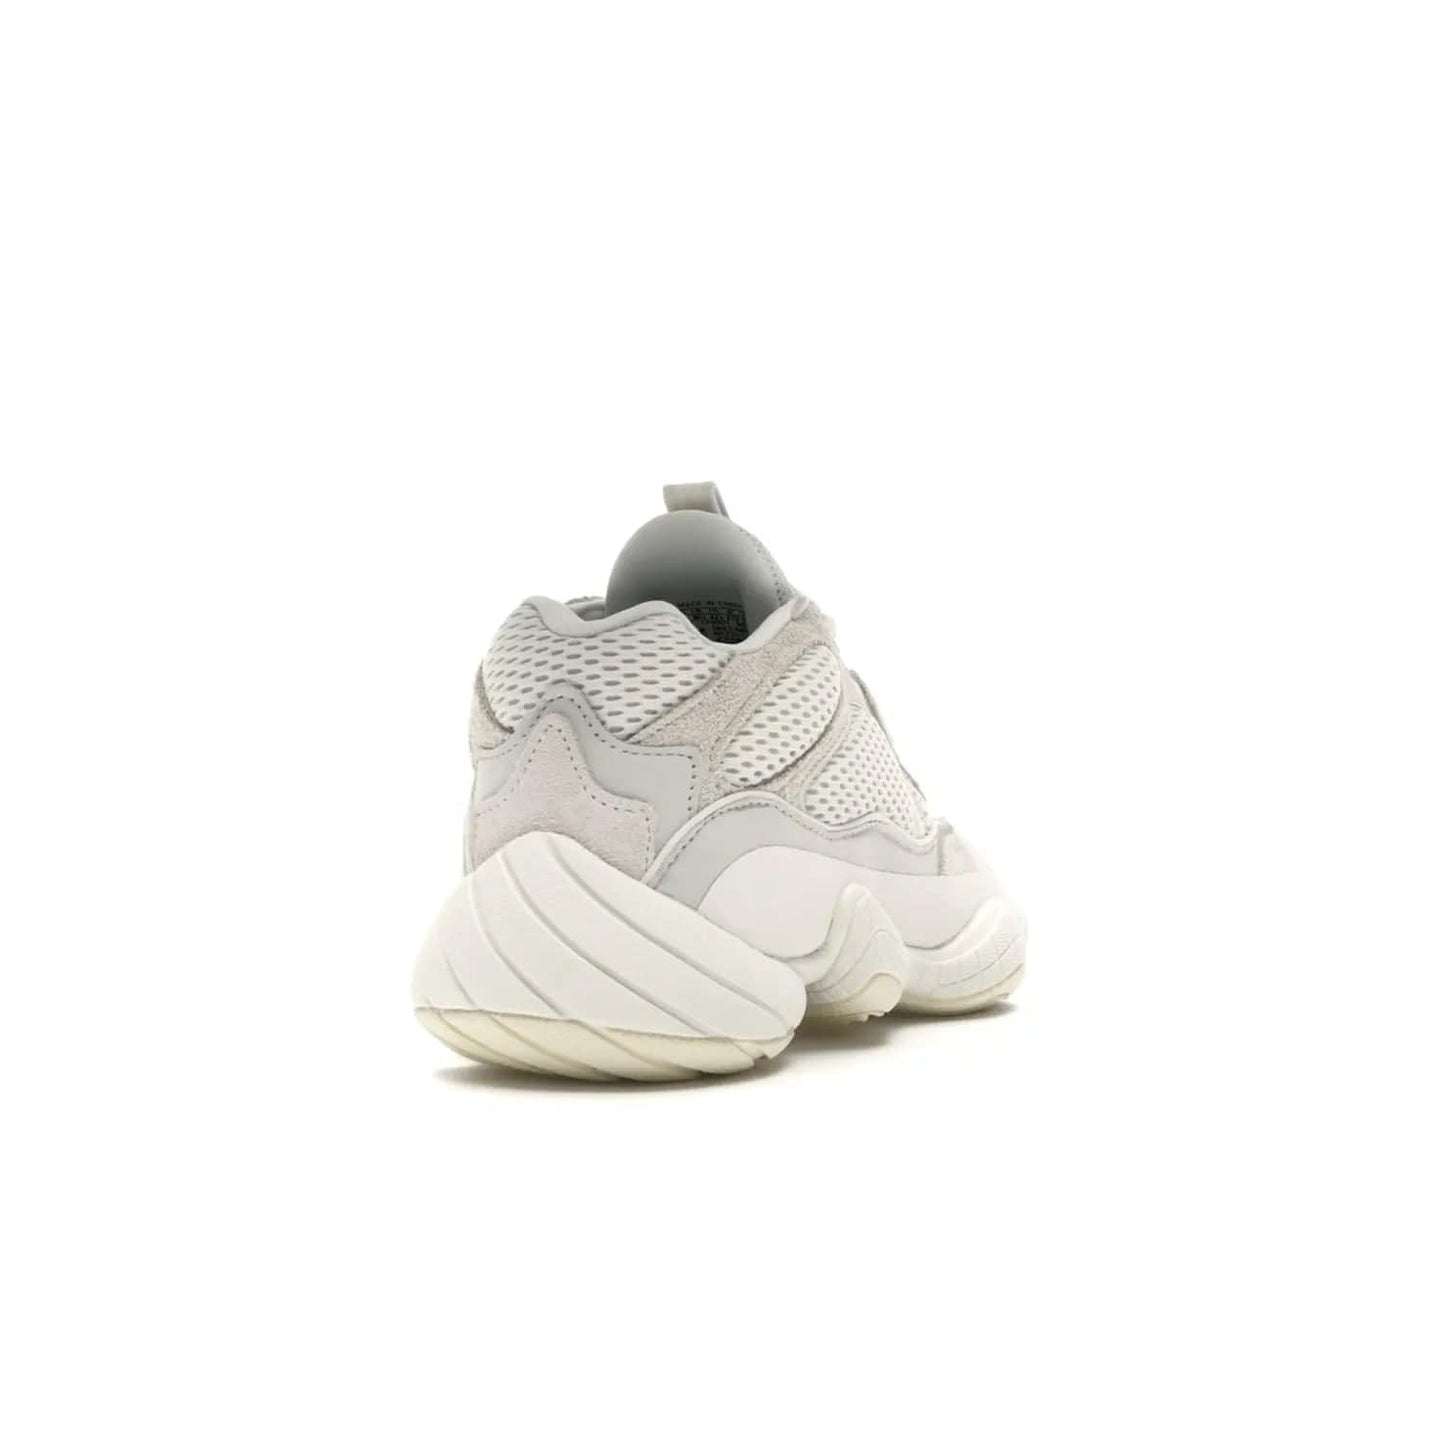 adidas Yeezy 500 Bone White - Image 30 - Only at www.BallersClubKickz.com - Classic look perfect for any sneaker collection. The adidas Yeezy 500 "Bone White" blends a white mesh upper with suede overlays & a chunky midsole inspired by the Adidas KB3. Complimented by a tonal-cream outsole, this timeless style is a must-have.